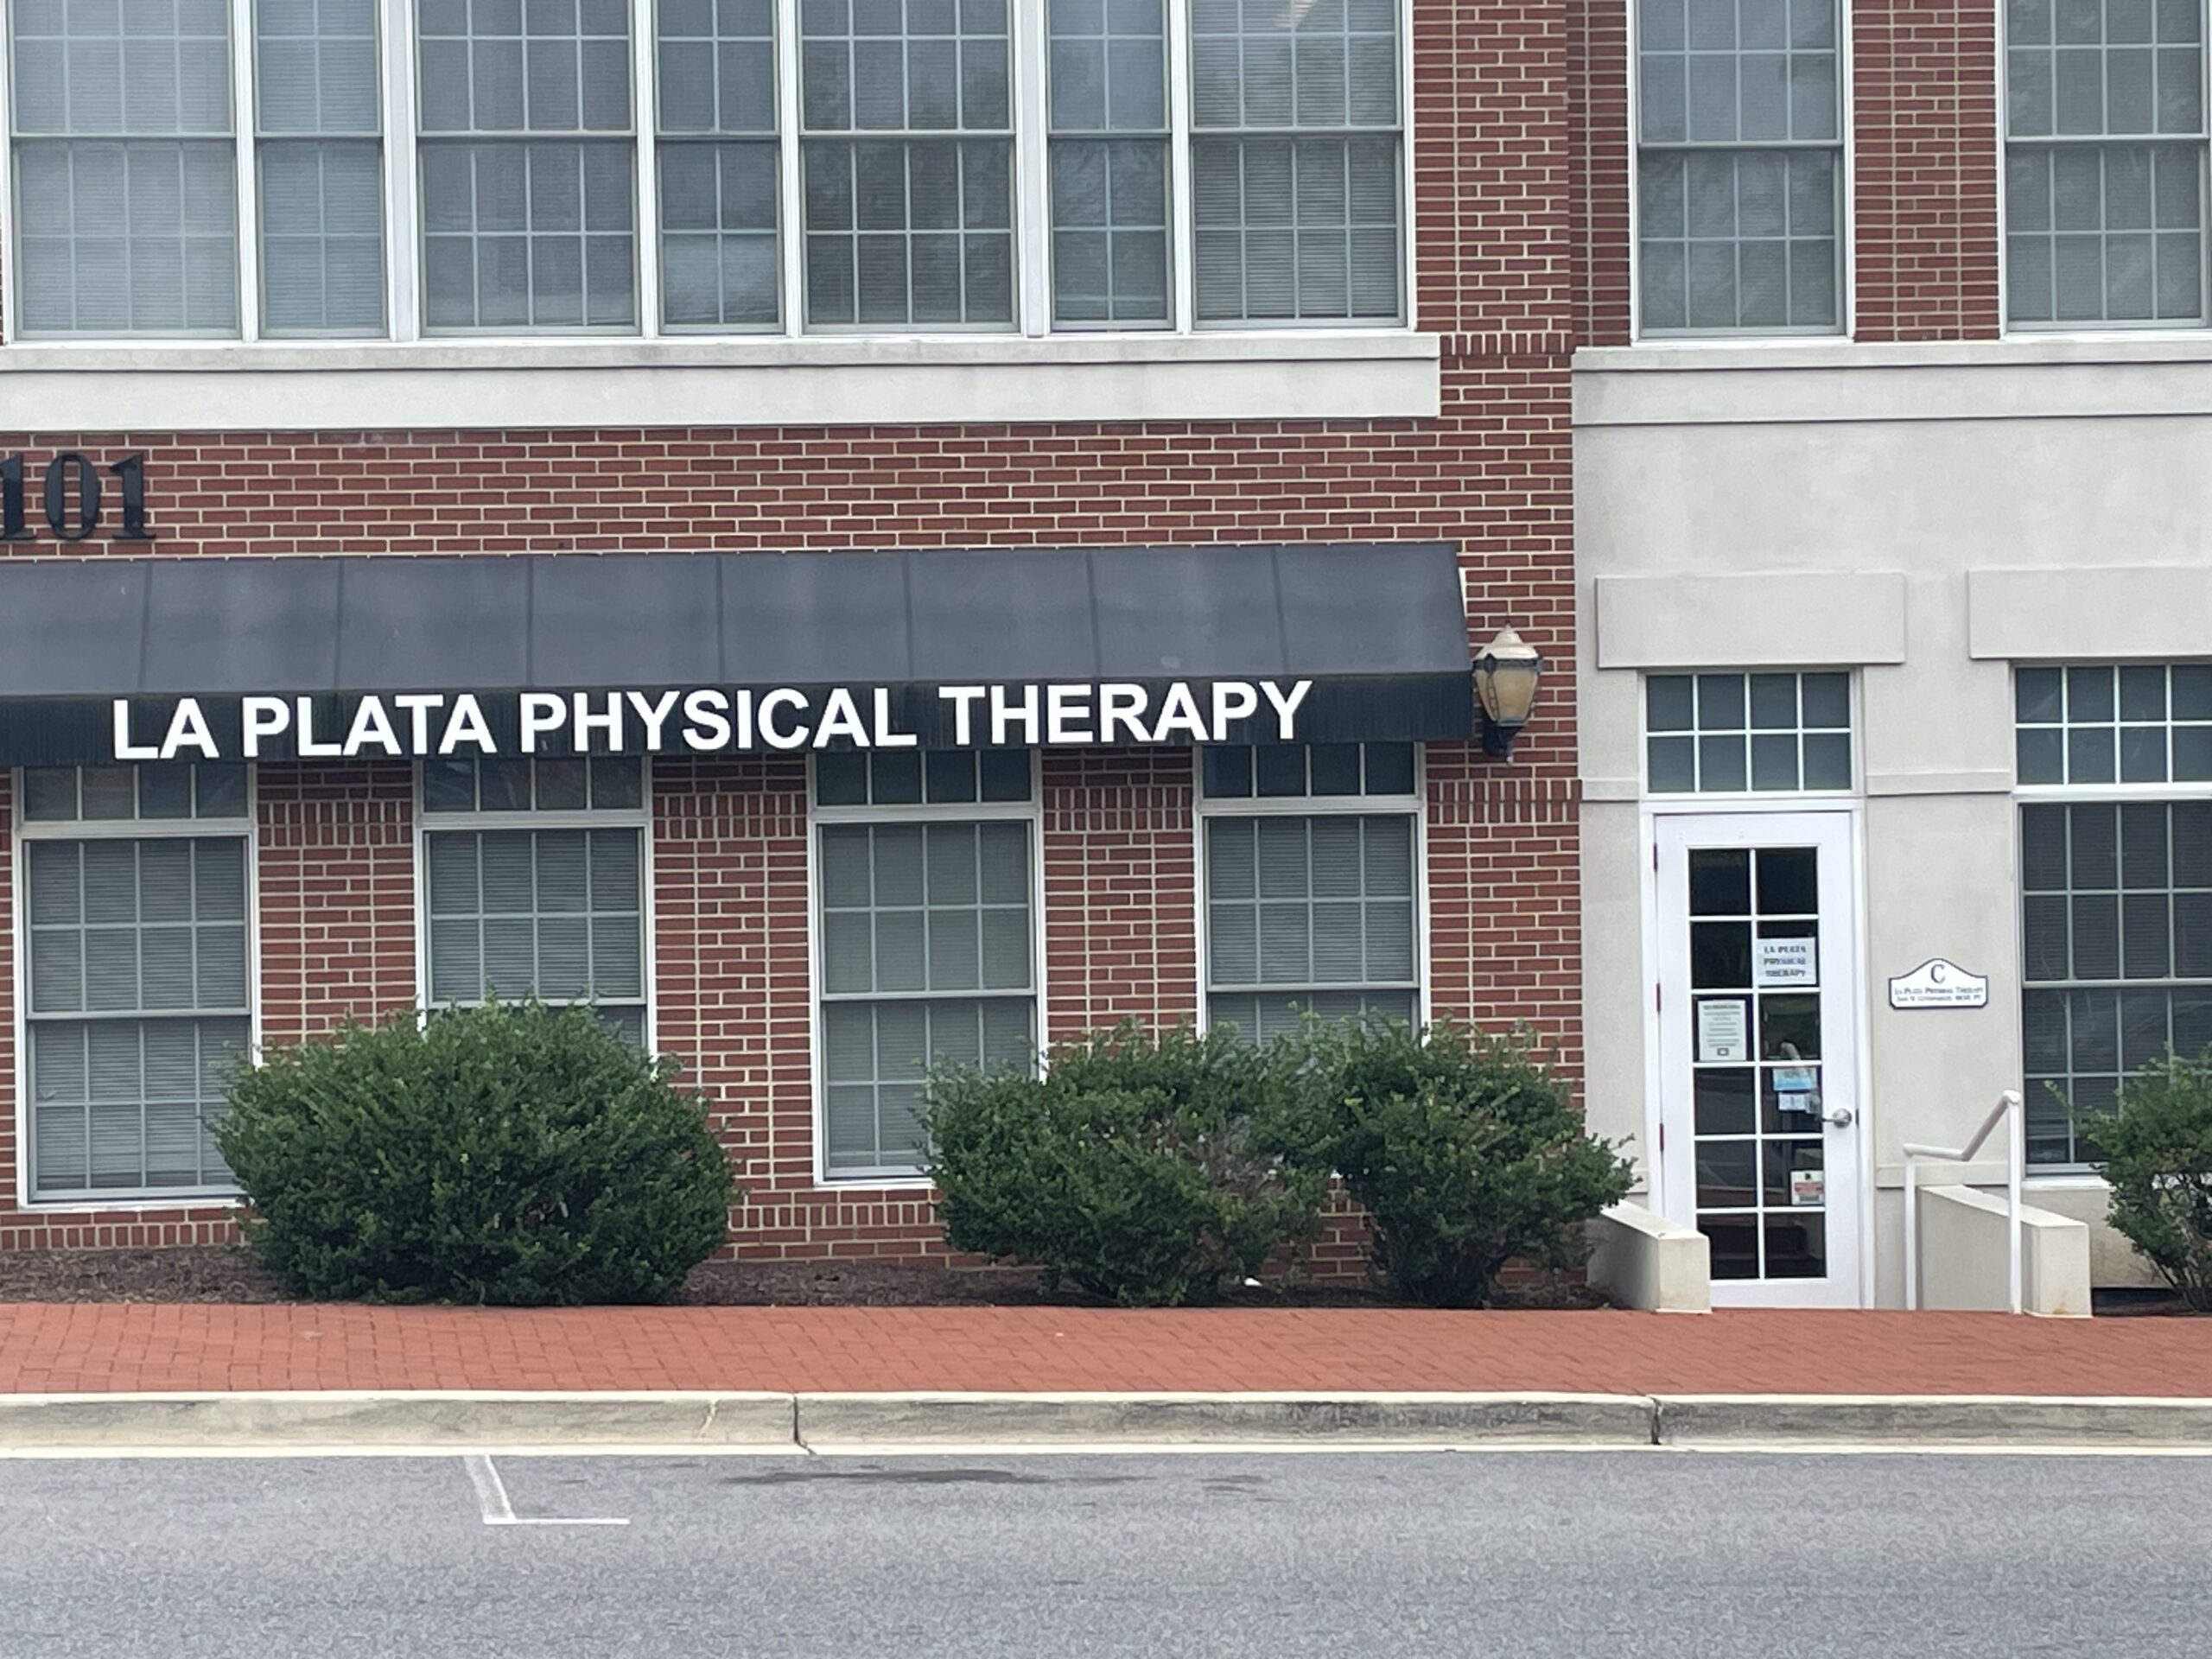 La Plata Physical Therapy in Maryland, Centennial Street Entrance